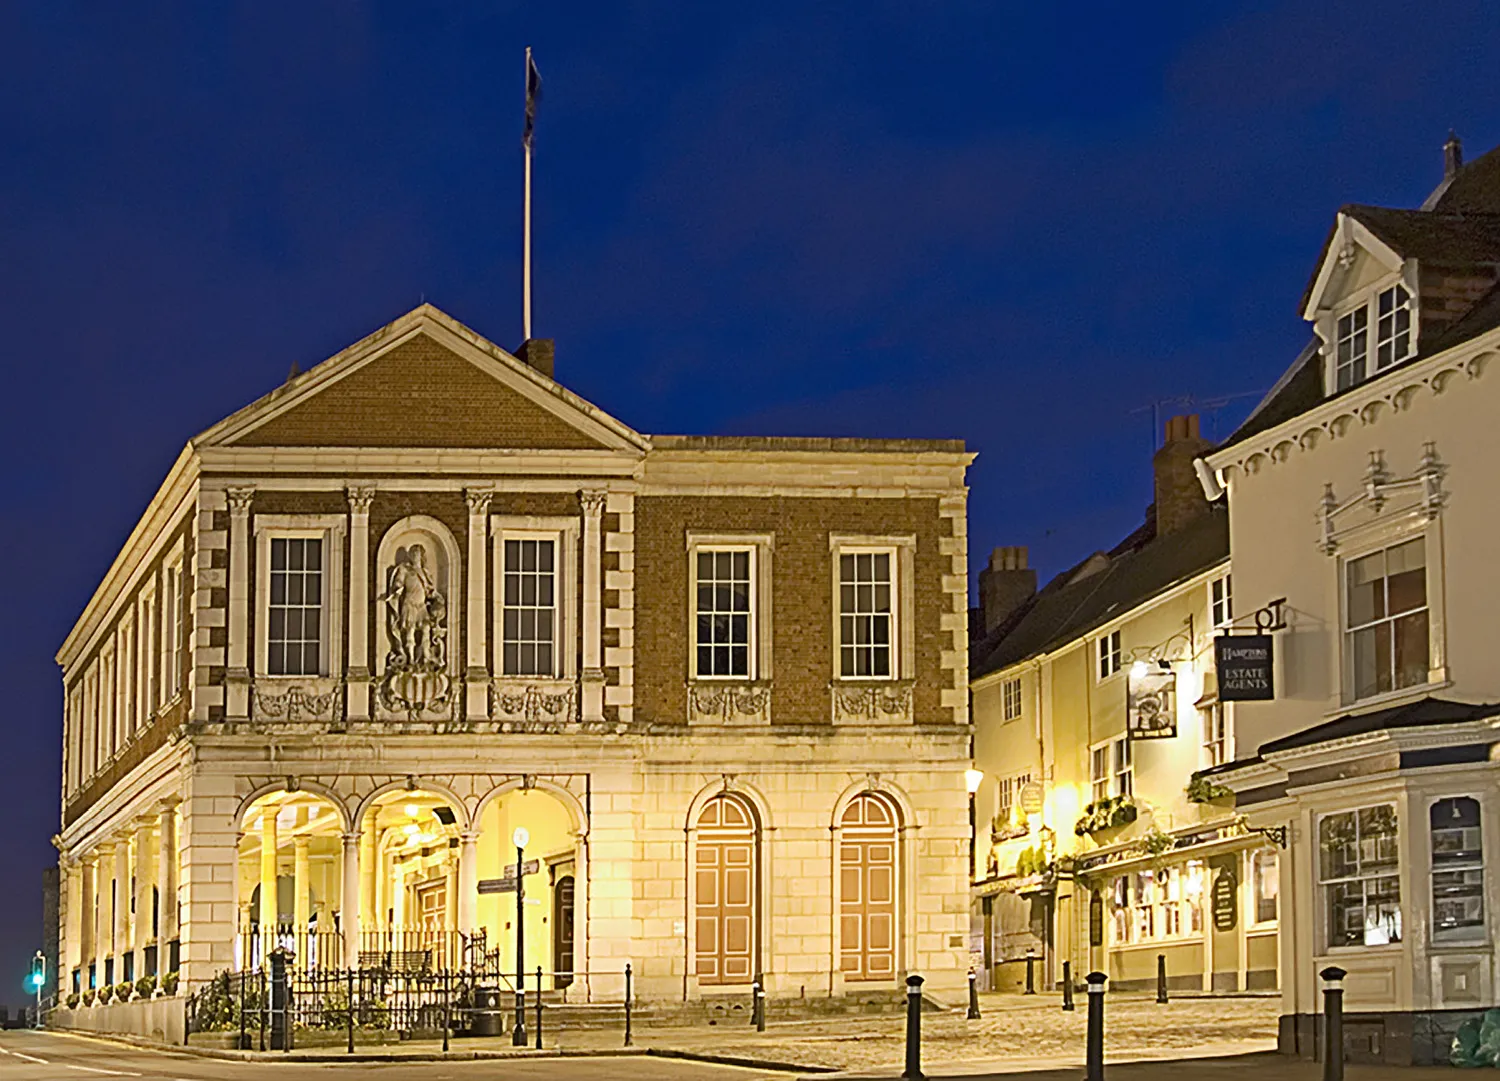 Photo showing: Windsor Guildhall opened in 1689. Night shot showing the  south side with the open ground floor known as the Cornmarket with the statue of Prince George of Denmark above that was installed in 1713. To the right is the 1829 extension. Brown brick and stone.